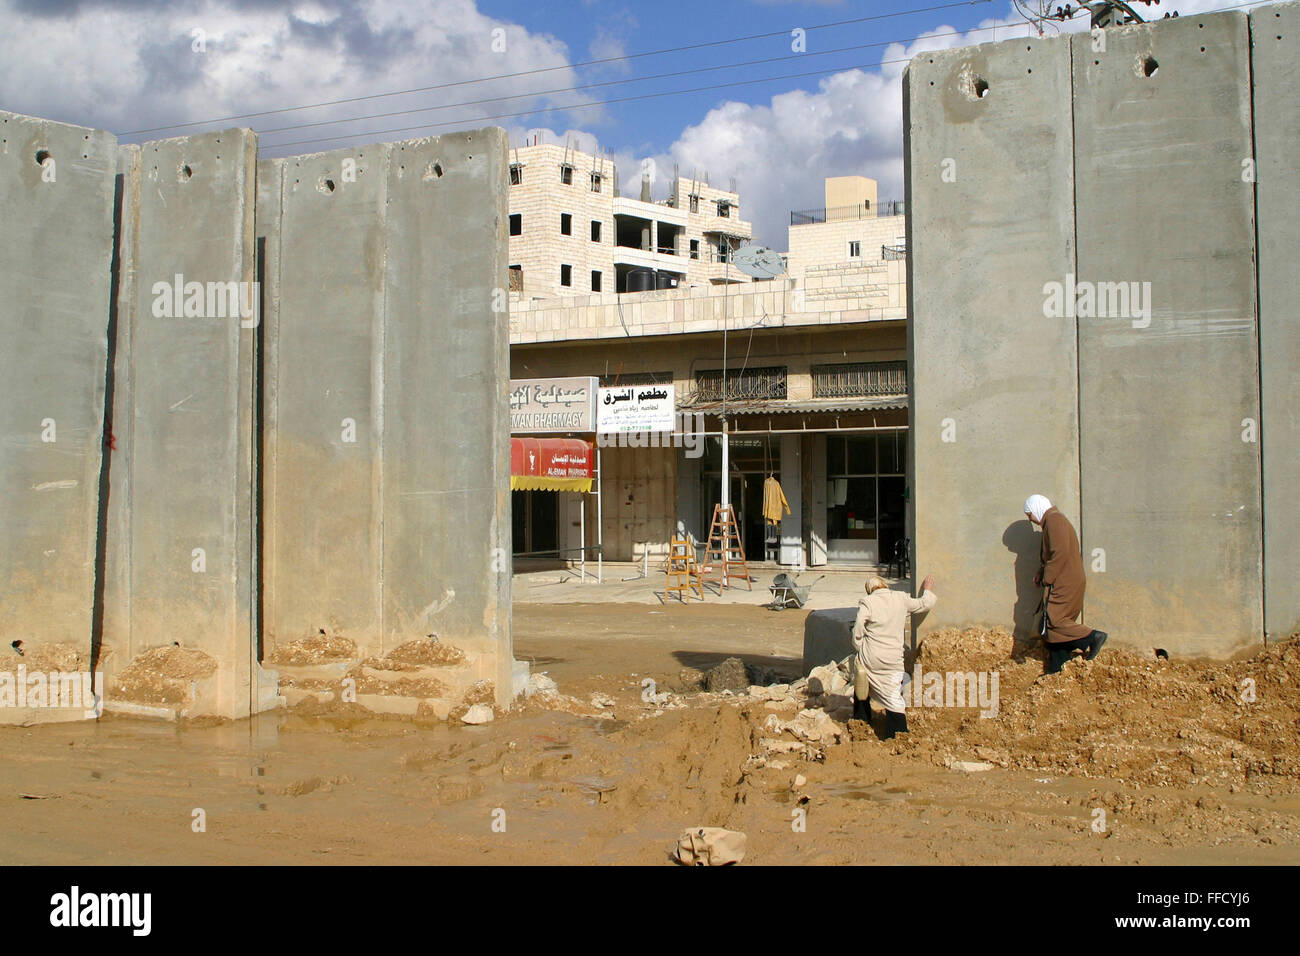 Palestinian women pass through a gap in the controversial Wall between Israel and Palestine rather than going through the Qalandiya checkpoint. Stock Photo